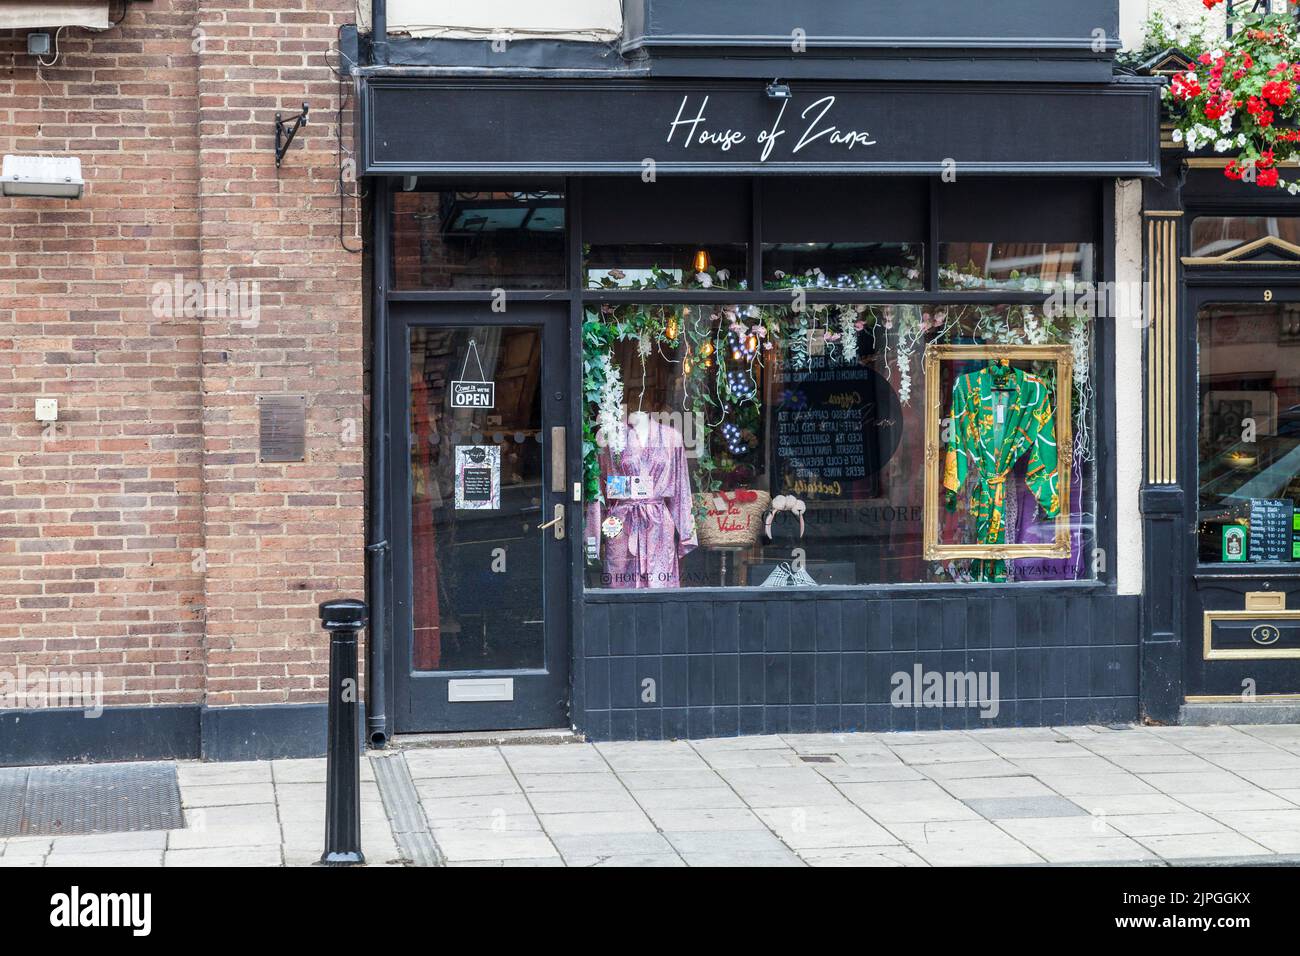 Darlington, UK. 18th August 2022. Clothing giant, ZARA, has lost a legal action against a small independent trader, House of Zana, based in the town, over the use of the similar brand name. Credit David Dixon / Alamy Stock Photo